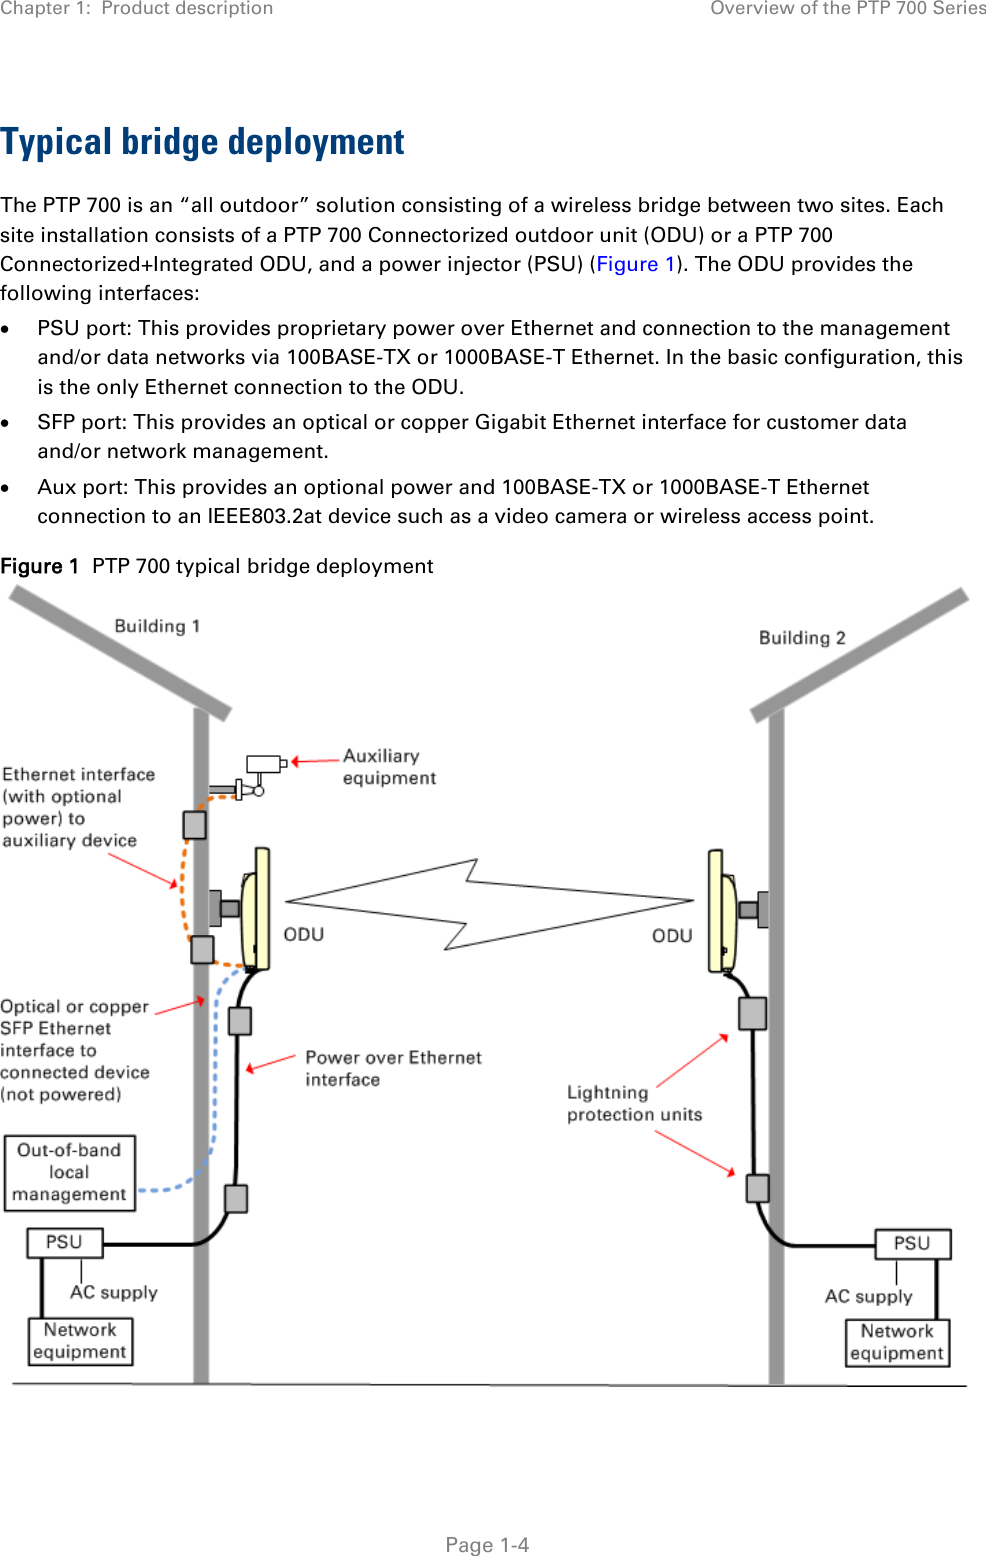 Chapter 1:  Product description Overview of the PTP 700 Series  Typical bridge deployment The PTP 700 is an “all outdoor” solution consisting of a wireless bridge between two sites. Each site installation consists of a PTP 700 Connectorized outdoor unit (ODU) or a PTP 700 Connectorized+Integrated ODU, and a power injector (PSU) (Figure 1). The ODU provides the following interfaces: • PSU port: This provides proprietary power over Ethernet and connection to the management and/or data networks via 100BASE-TX or 1000BASE-T Ethernet. In the basic configuration, this is the only Ethernet connection to the ODU. • SFP port: This provides an optical or copper Gigabit Ethernet interface for customer data and/or network management. • Aux port: This provides an optional power and 100BASE-TX or 1000BASE-T Ethernet connection to an IEEE803.2at device such as a video camera or wireless access point. Figure 1  PTP 700 typical bridge deployment    Page 1-4 